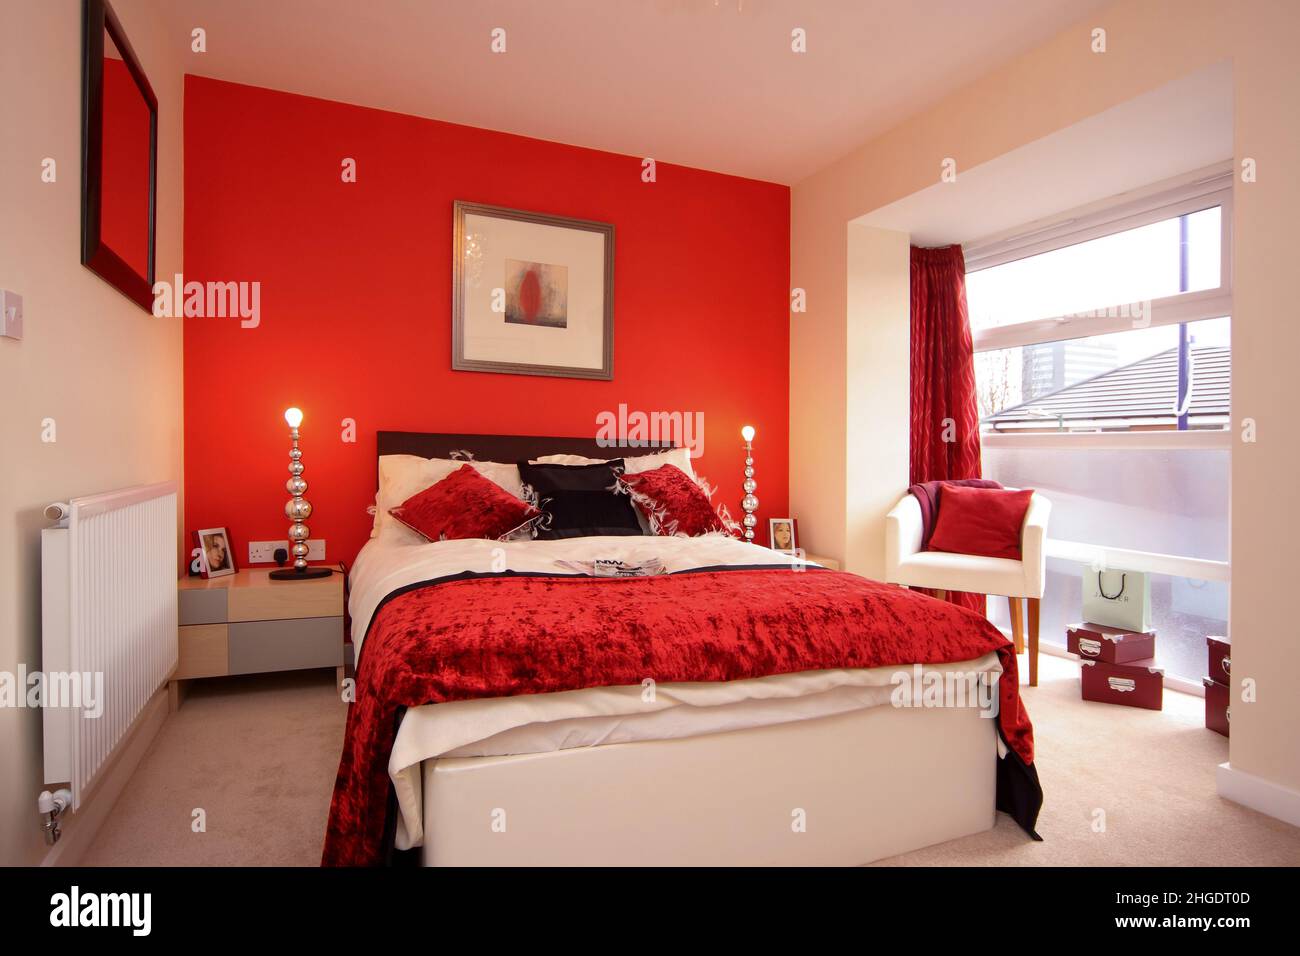 Bedroom, double kingsize bed, bright vivid red colour color scheme, velvet bedspread and cushions,bedside lights, red feature wall Stock Photo